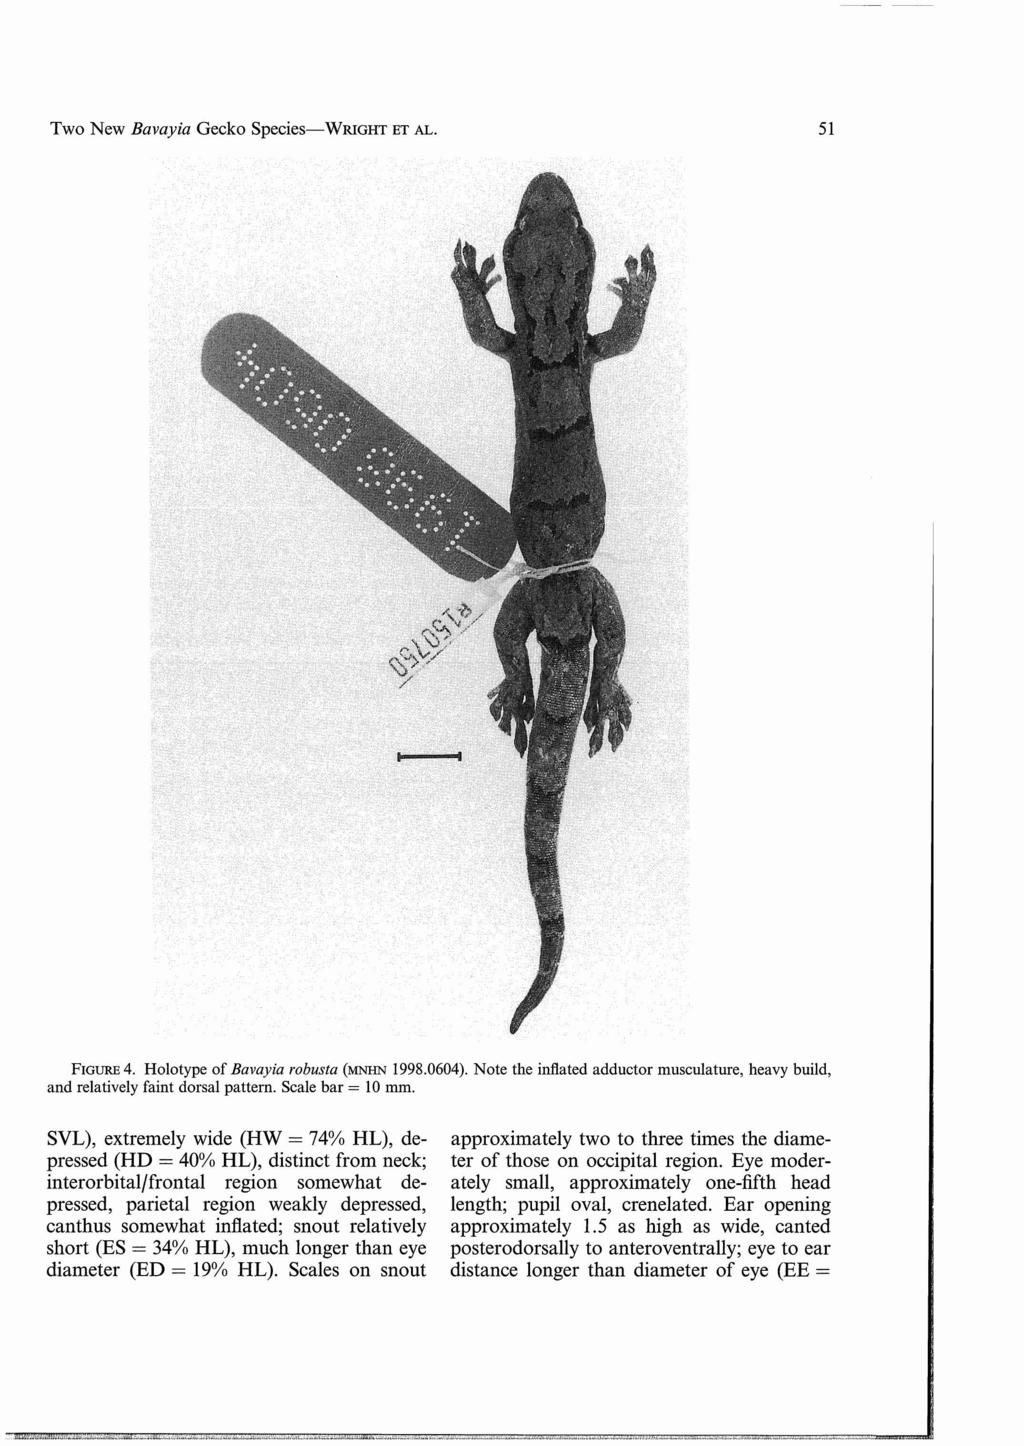 Two New Bavayia Gecko SpecieS-WRIGHT ET AL. 51 FIGURE 4. Holotype of Bavayia robusta (MNHN 1998.0604). Note the inflated adductor musculature, heavy build, and relatively faint dorsal pattern.